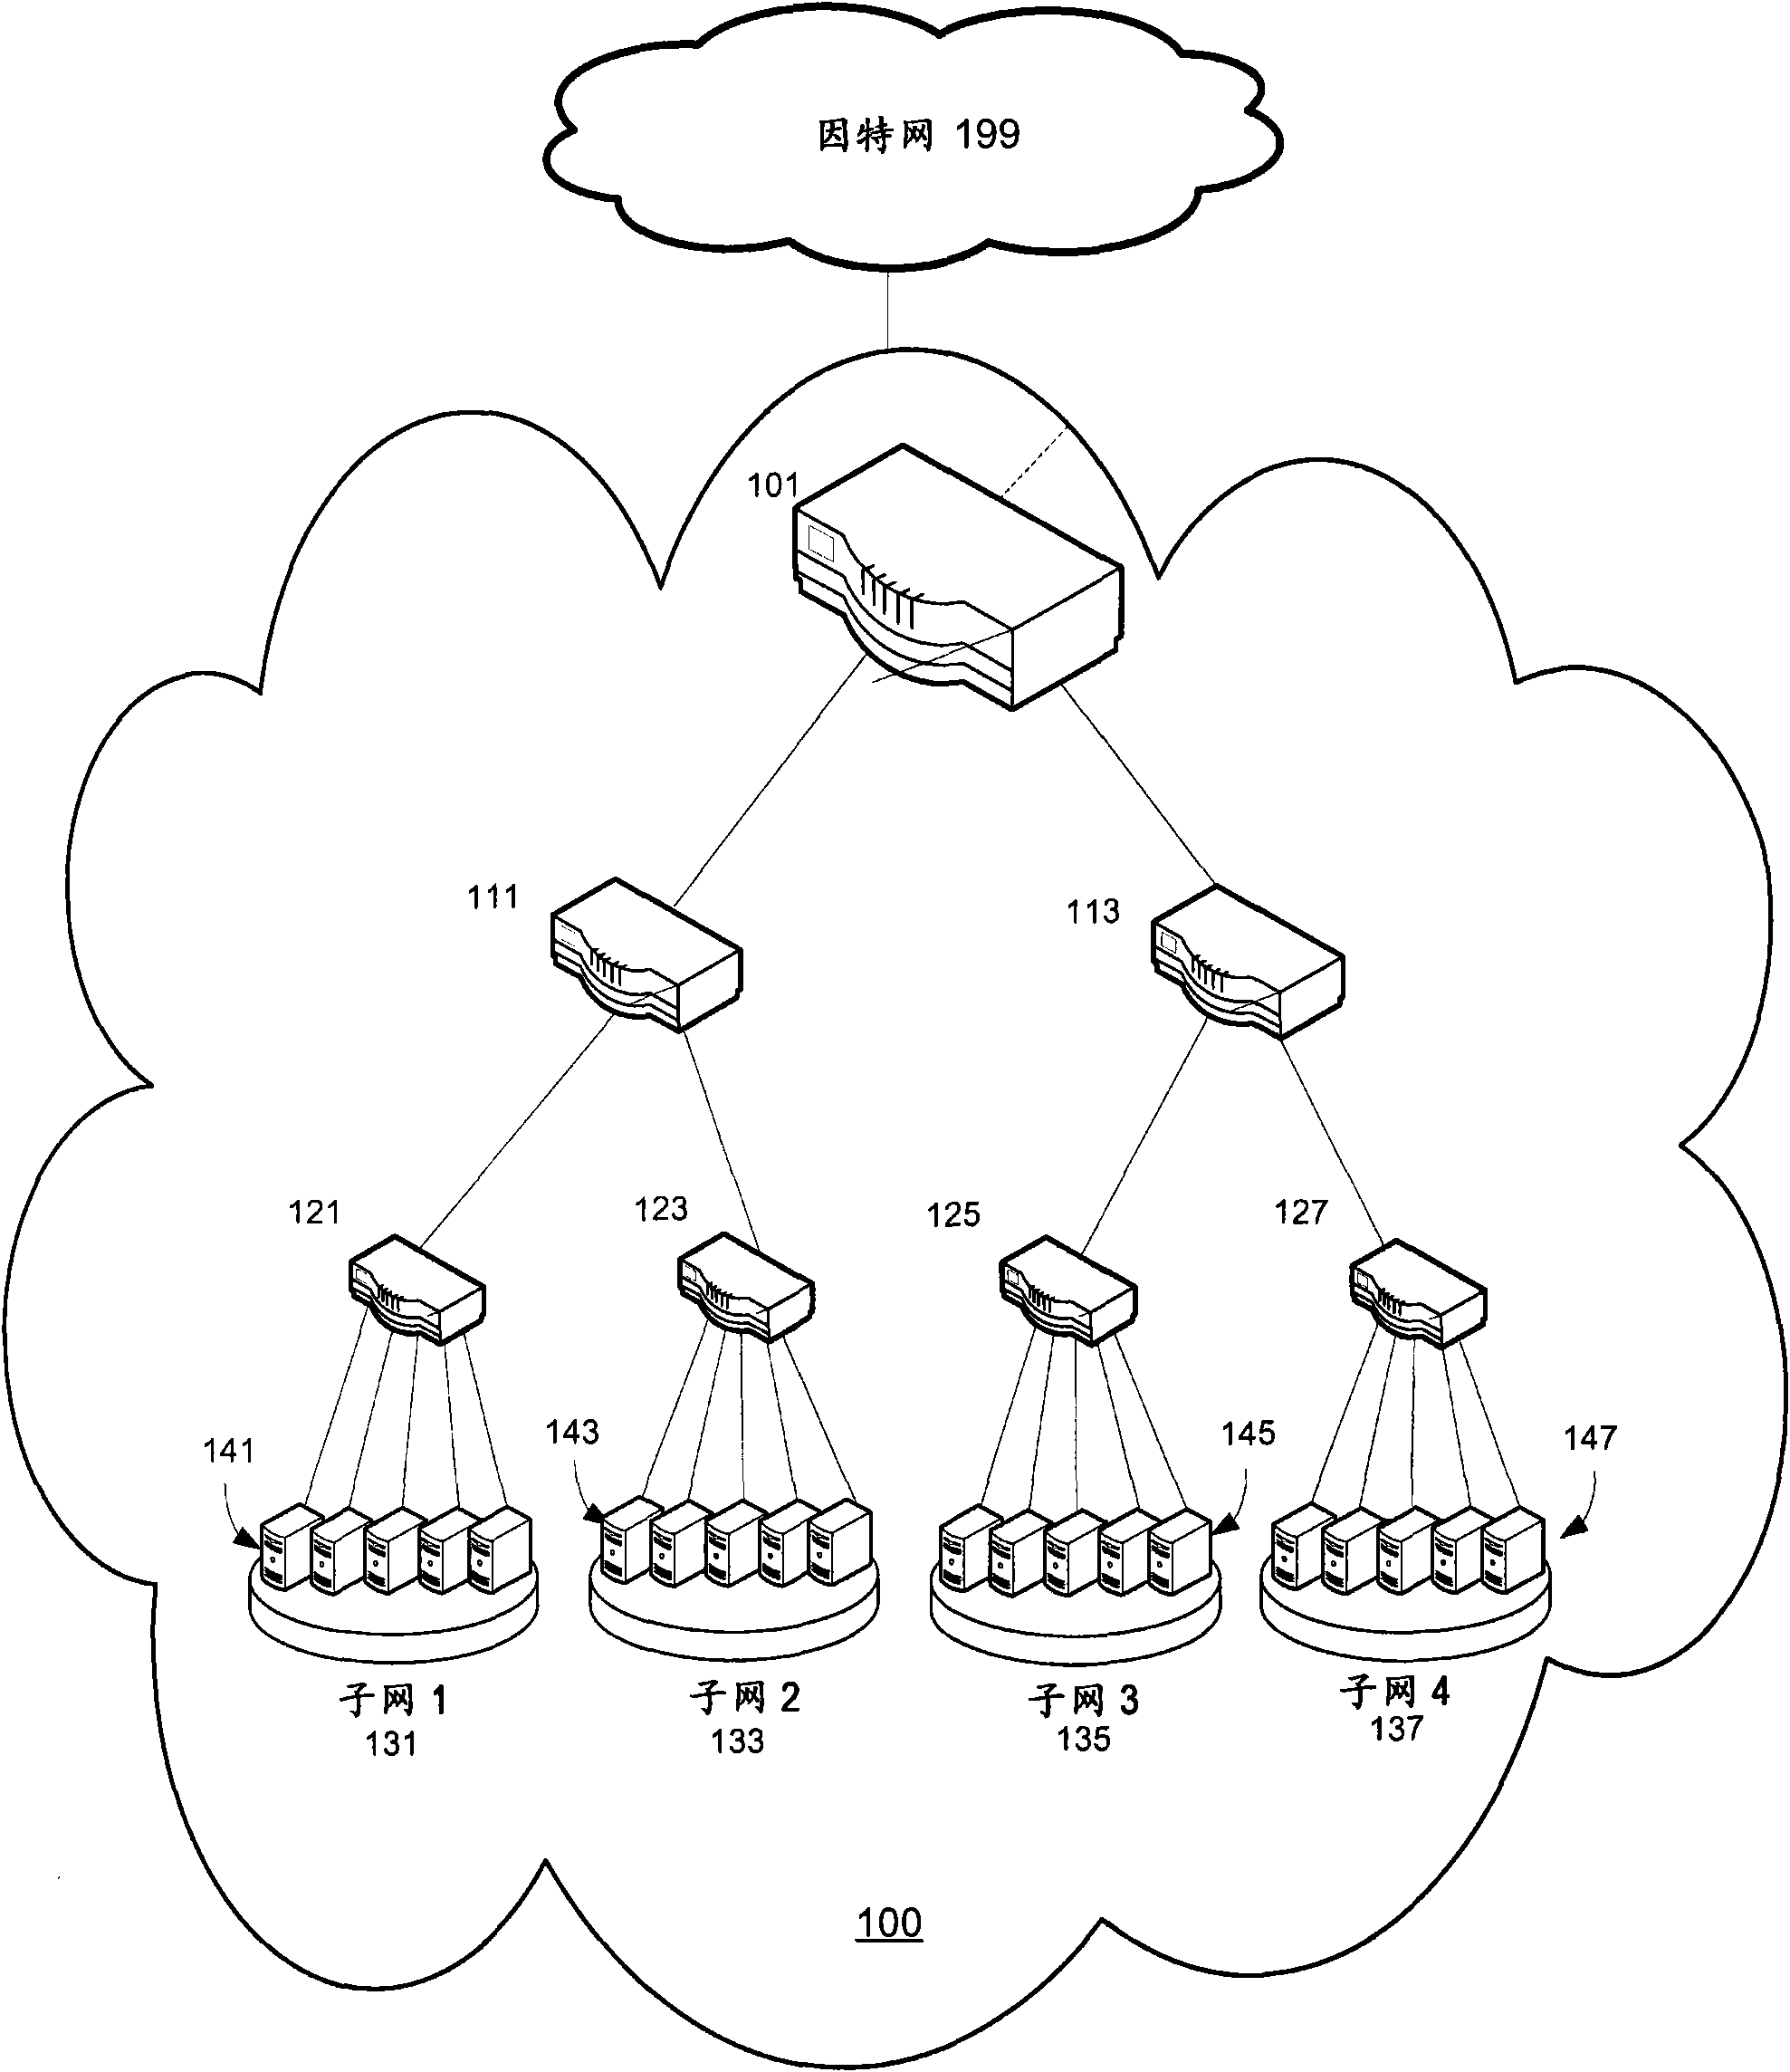 Method and system for application migration in a cloud